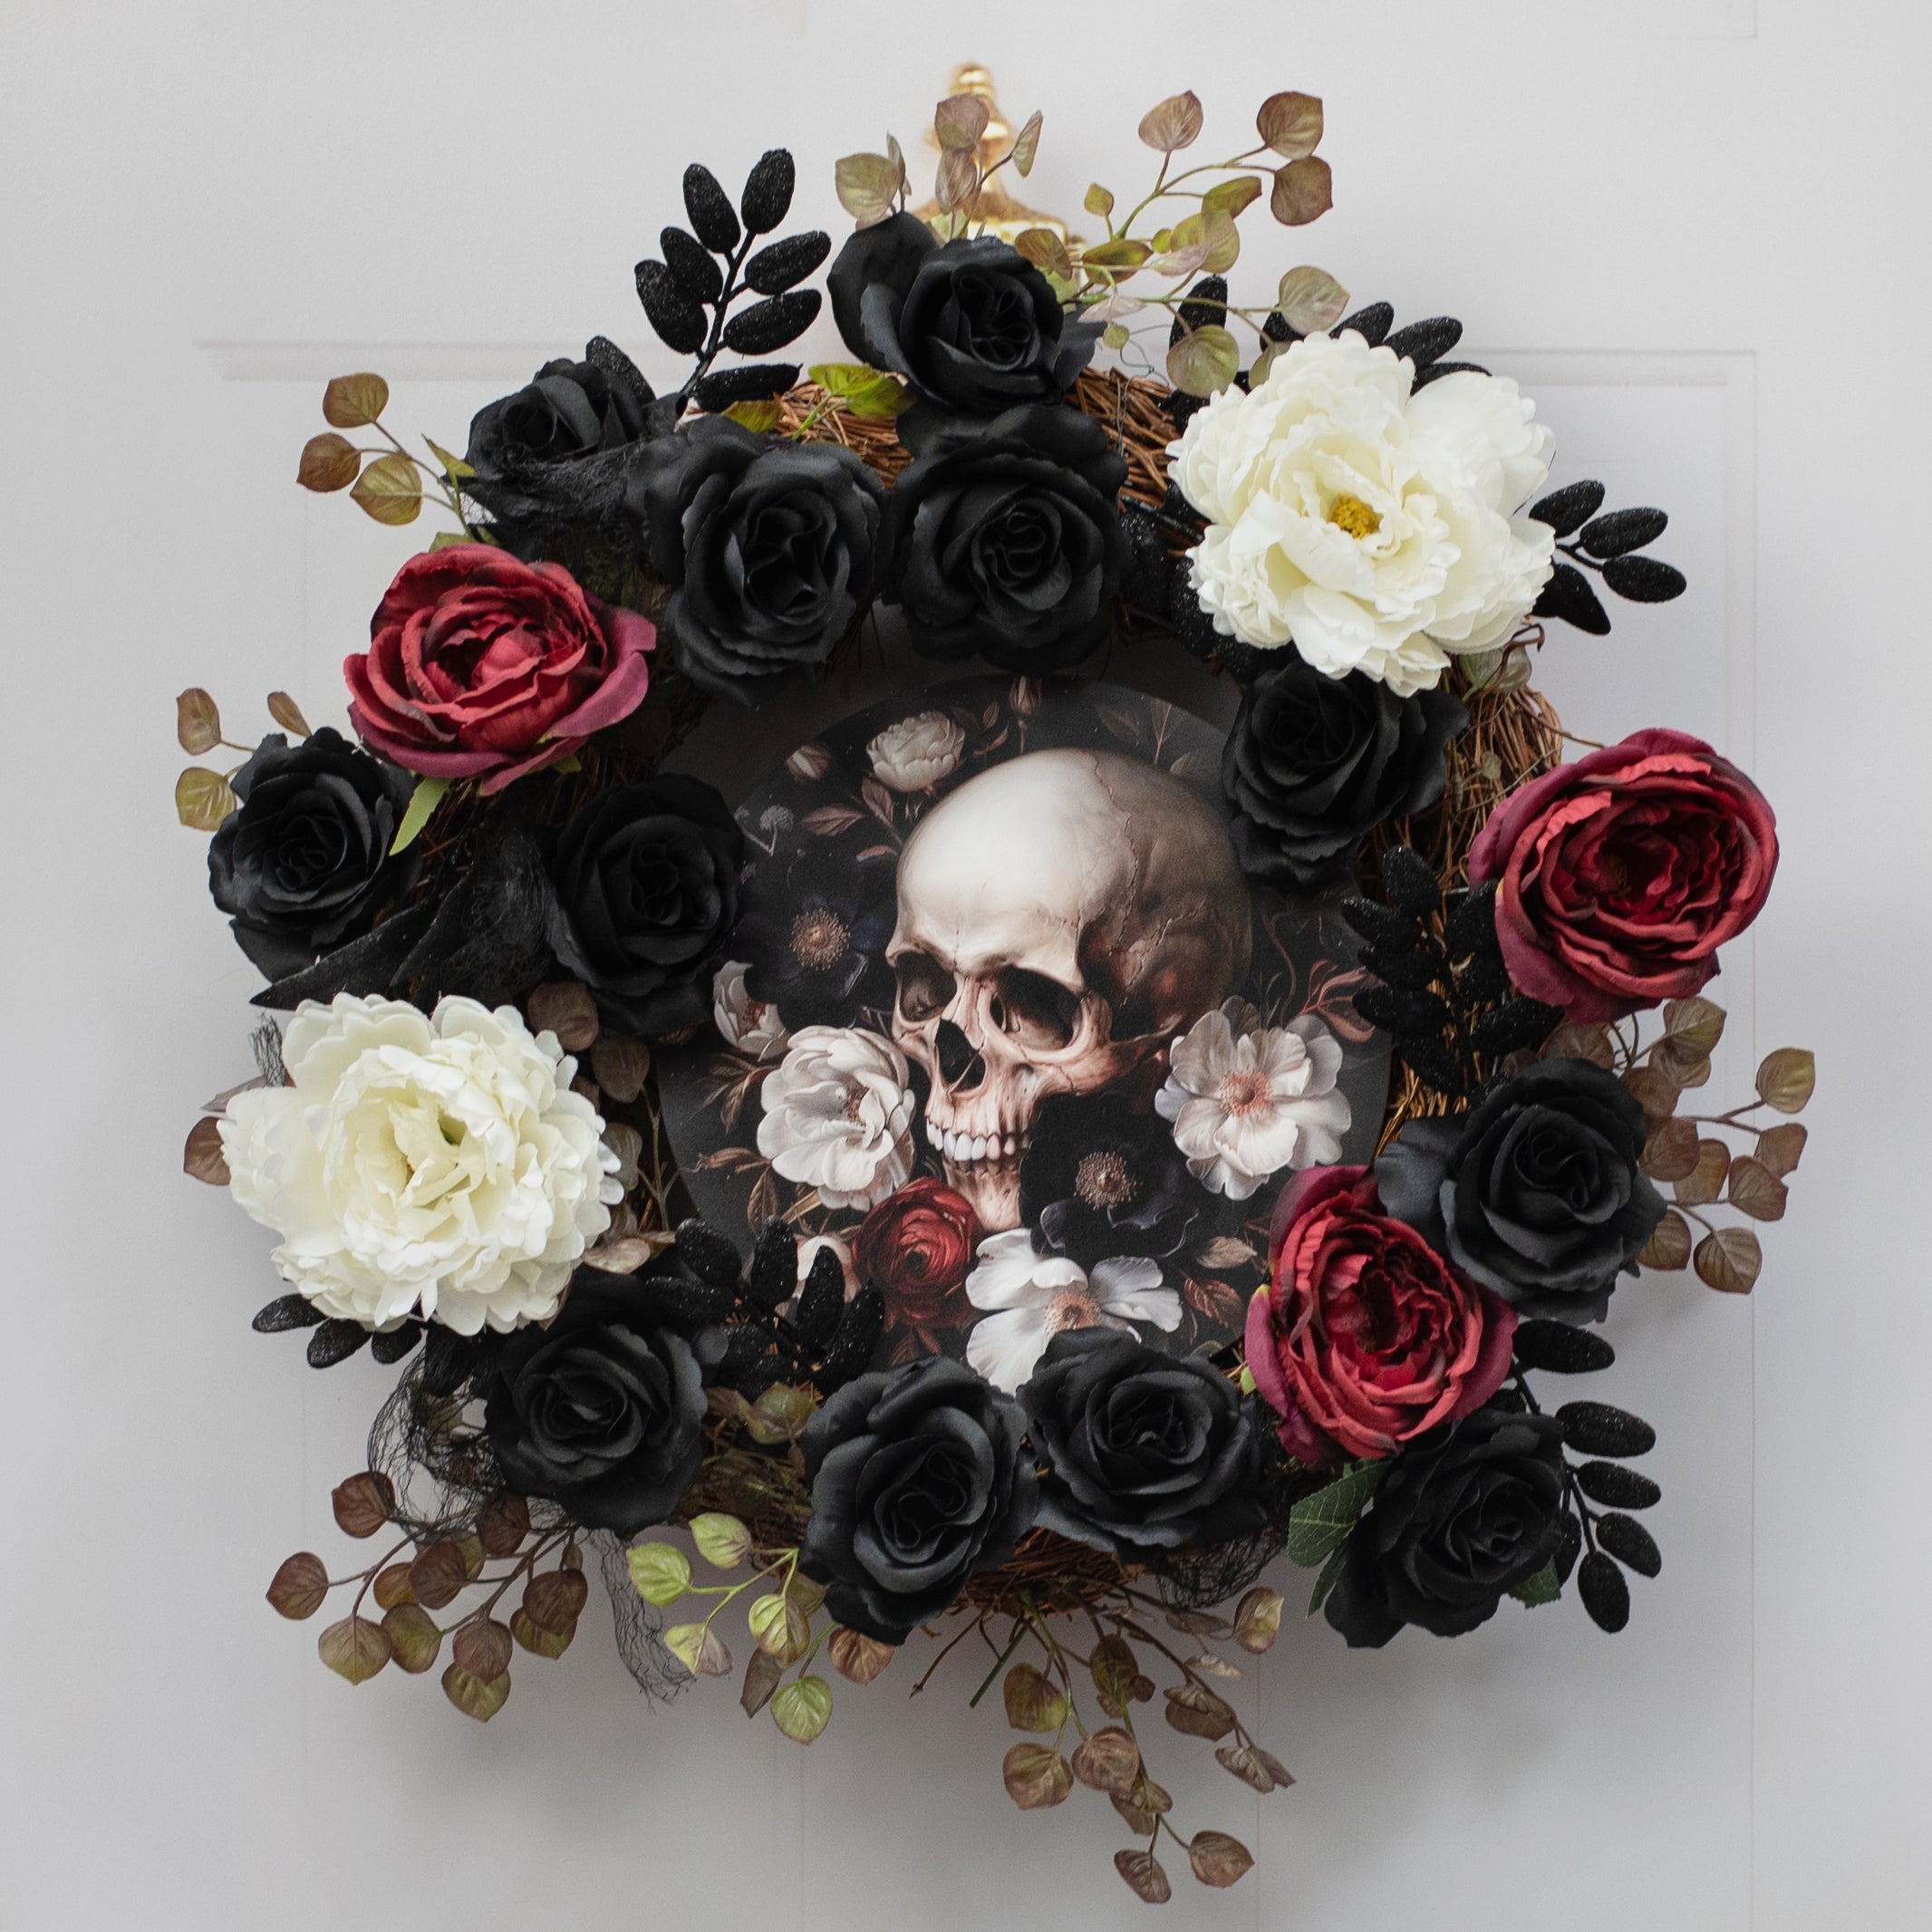 10.5" Round Waterproof Sign: Black, White & Red Floral Skull